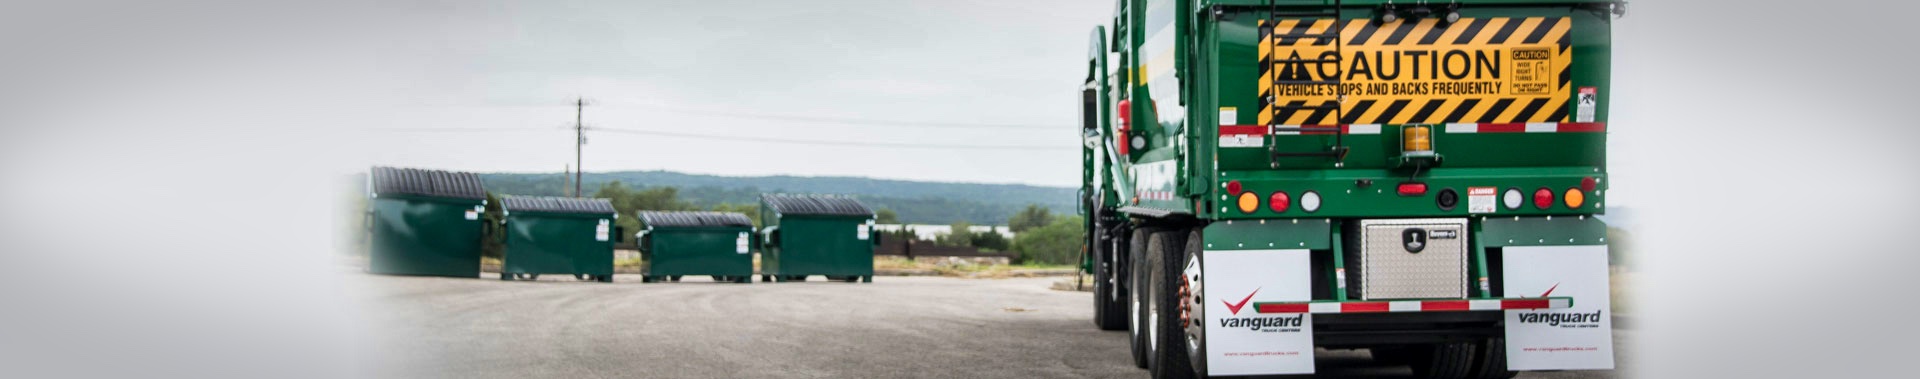 Commercial Waste Management Austin - Central Waste & Recycling